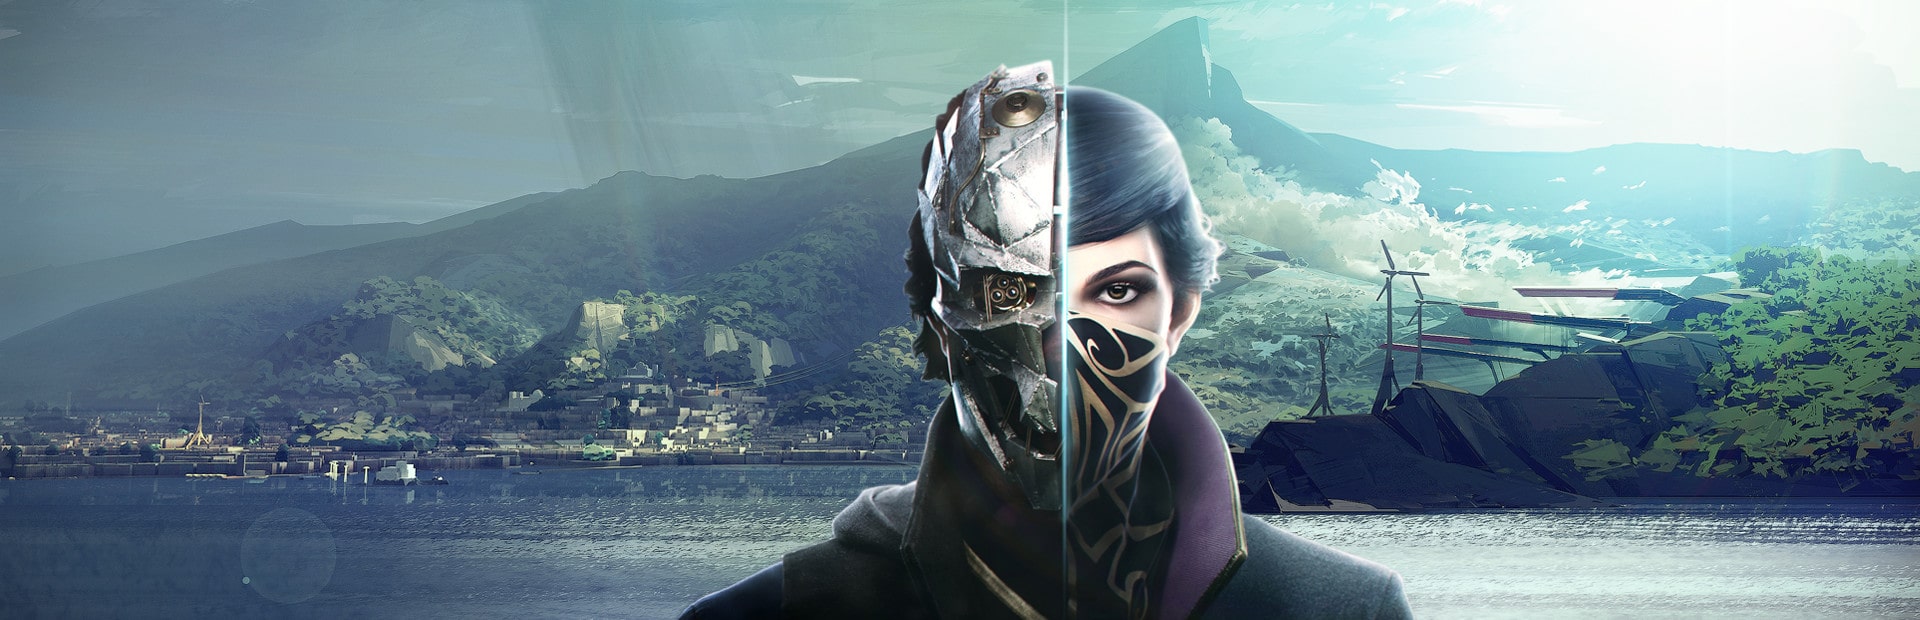 More Games Like Dishonored 2 for PC